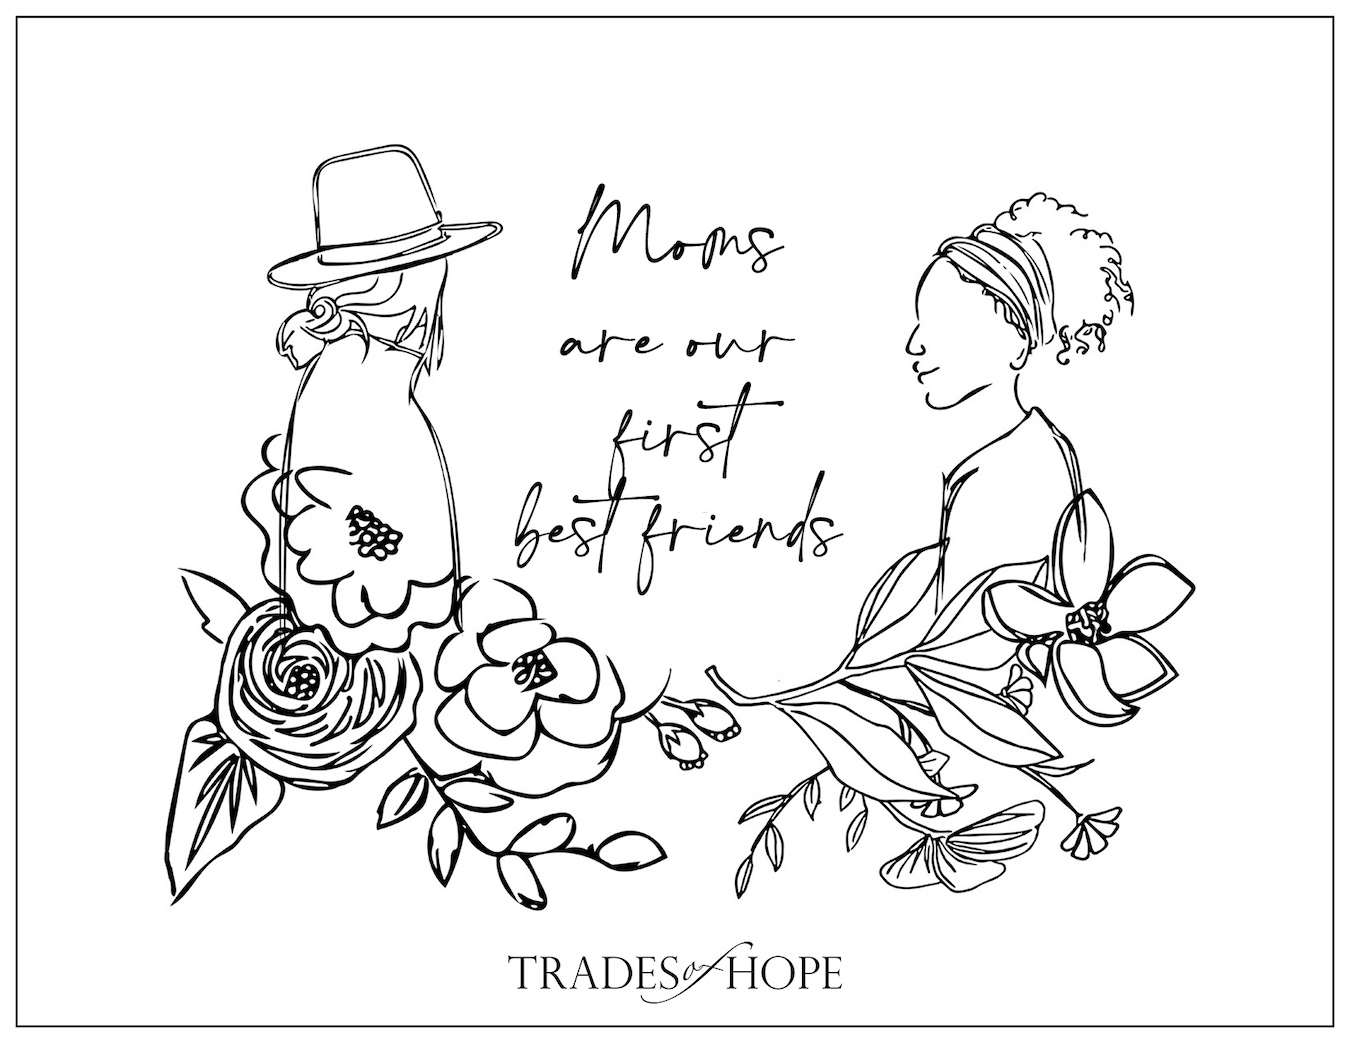 Moms Are Our First Best Friends - FREE DOWNLOAD COLORING PAGE